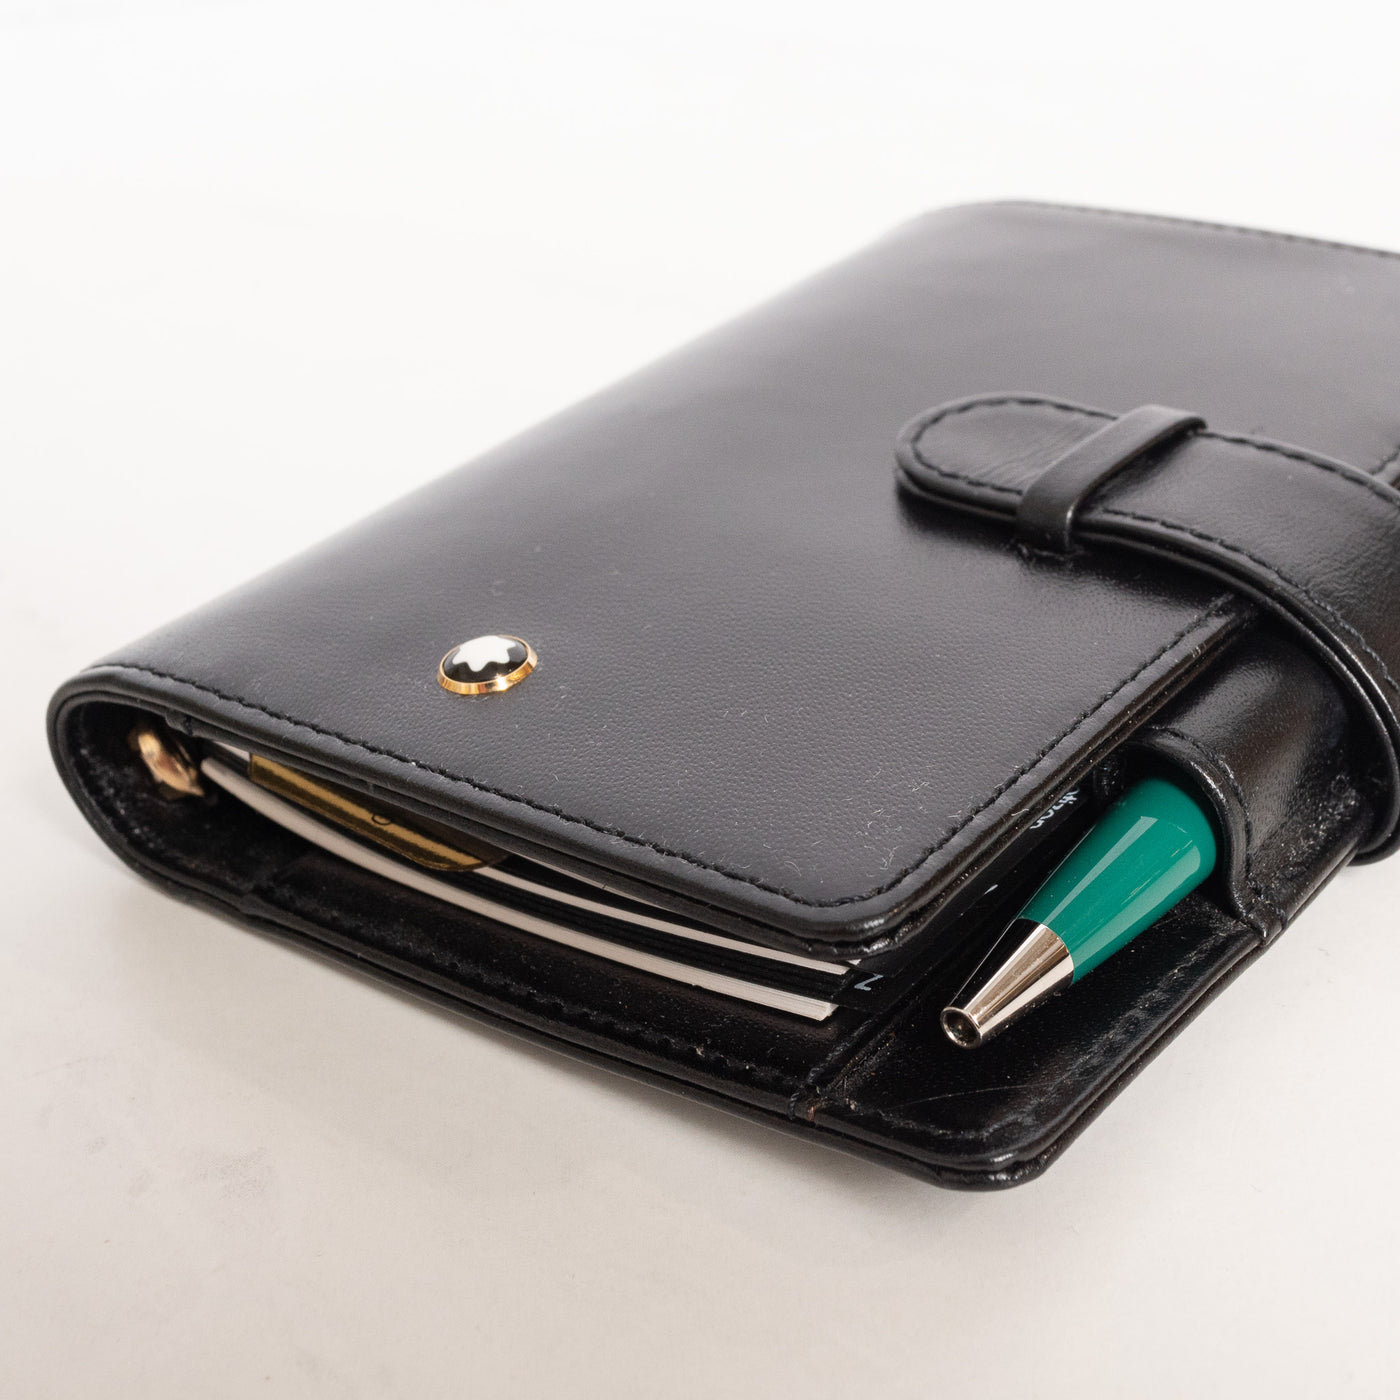 Montblanc Leather Goods Meisterstuck A7 Black Leather Pocket Organizer 14876 - Preowned Closed Details